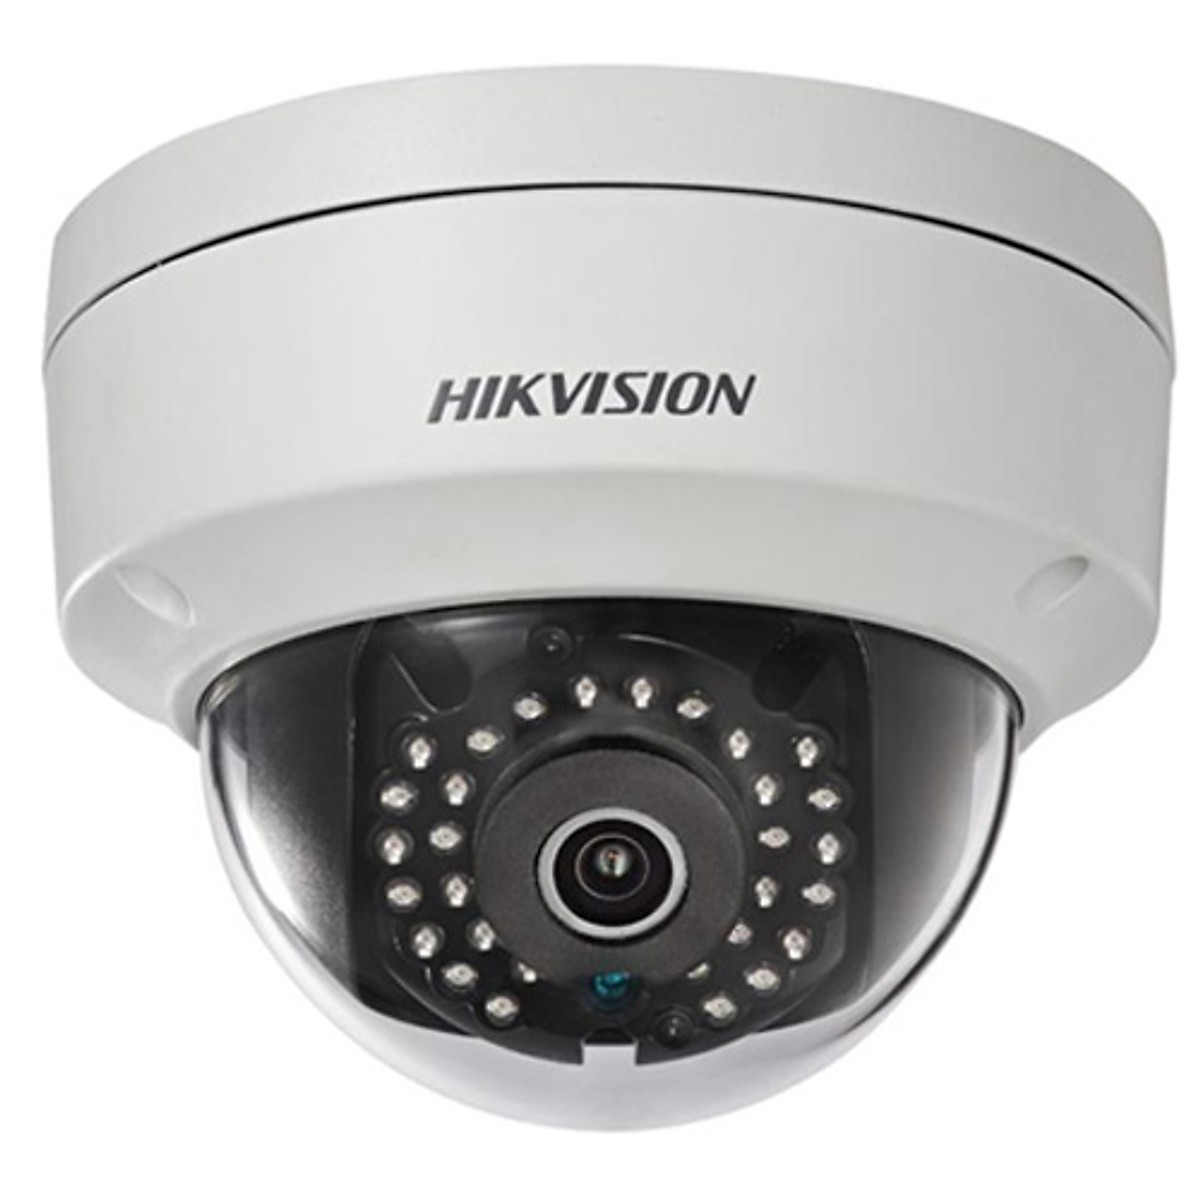 CAMERA HIKVISION IP WIFI 2MP DS-2CD2121G0-IW